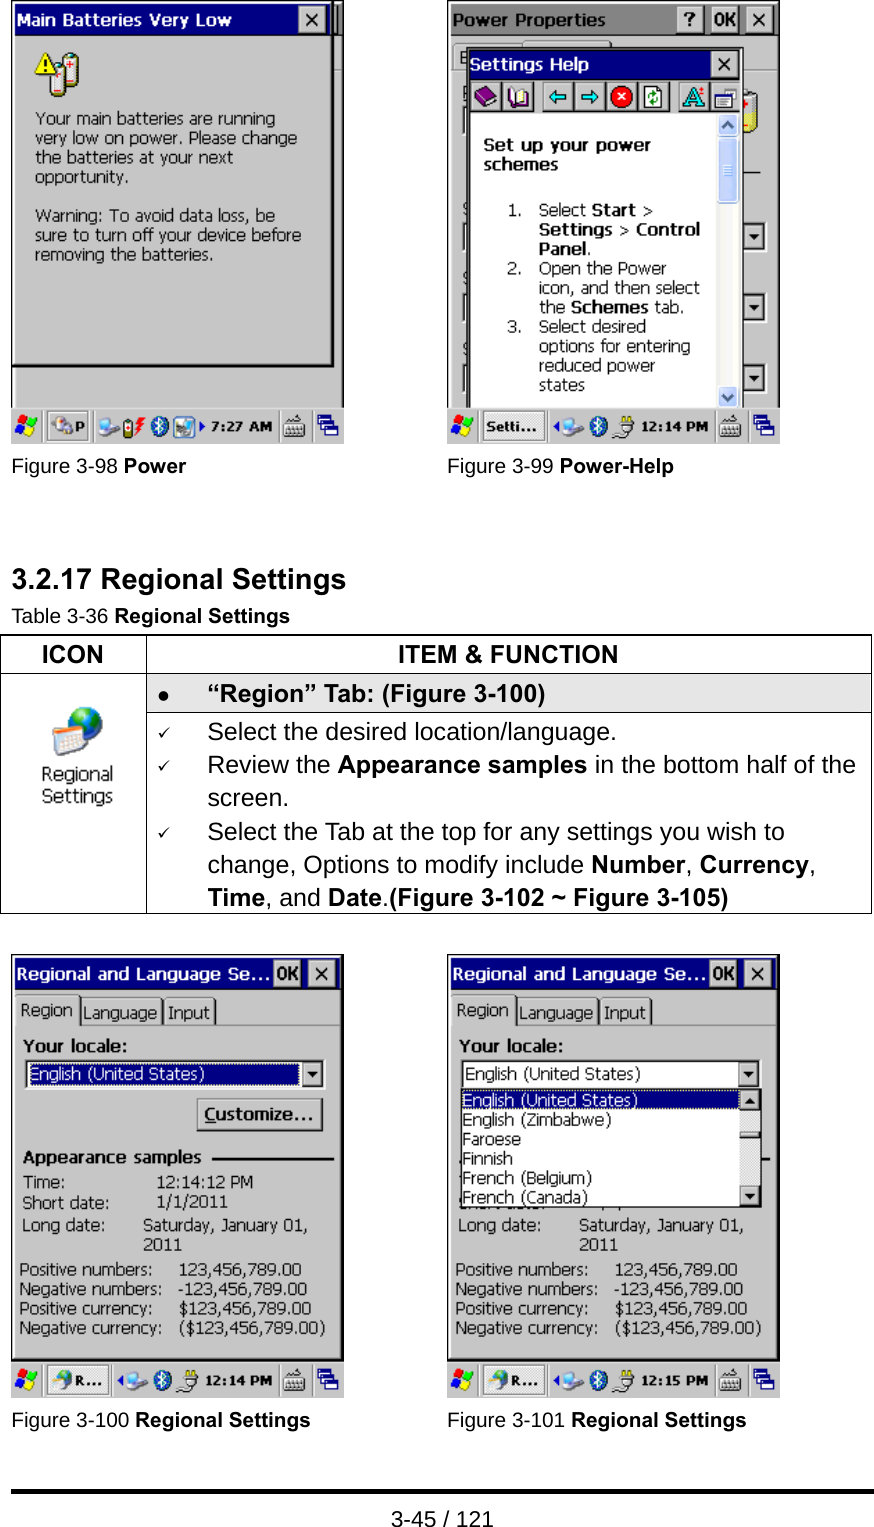  3-45 / 121    Figure 3-98 Power Figure 3-99 Power-Help   3.2.17 Regional Settings Table 3-36 Regional Settings ICON  ITEM &amp; FUNCTION z “Region” Tab: (Figure 3-100)  9 Select the desired location/language. 9 Review the Appearance samples in the bottom half of the screen. 9 Select the Tab at the top for any settings you wish to change, Options to modify include Number, Currency, Time, and Date.(Figure 3-102 ~ Figure 3-105)     Figure 3-100 Regional Settings Figure 3-101 Regional Settings 